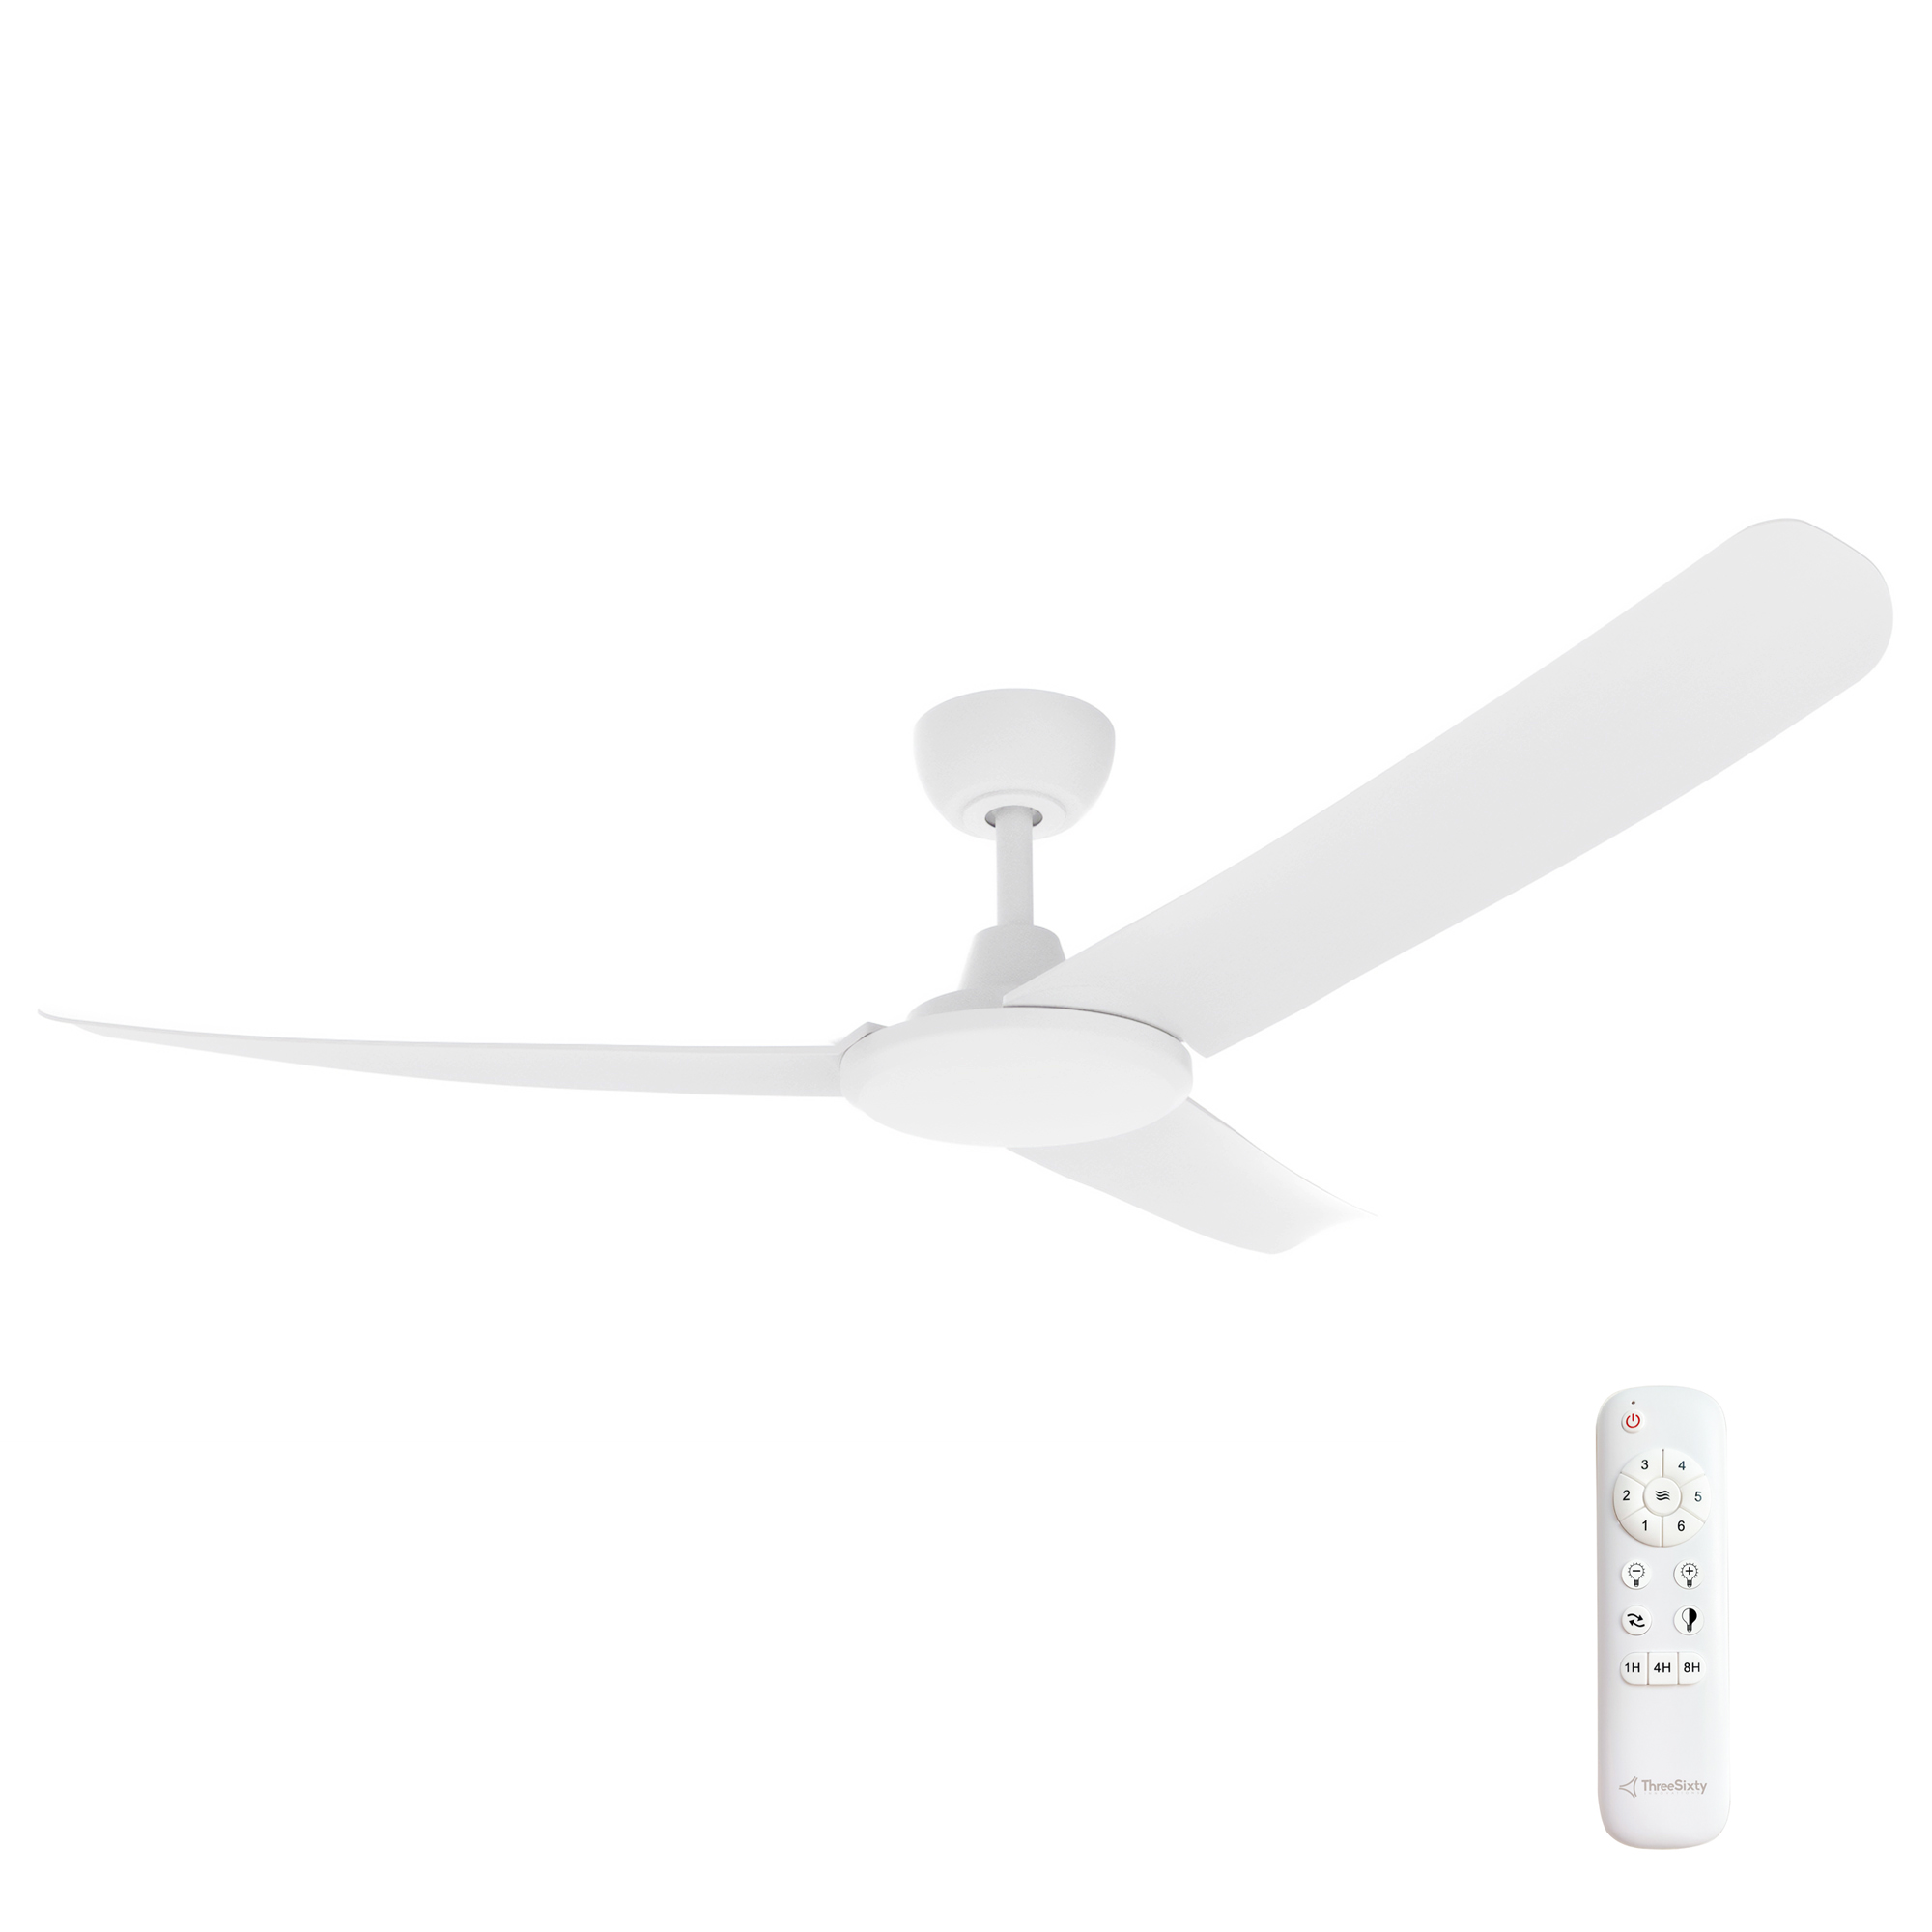 52" FlatJET DC Ceiling Fan in Matte White with 3 Blades